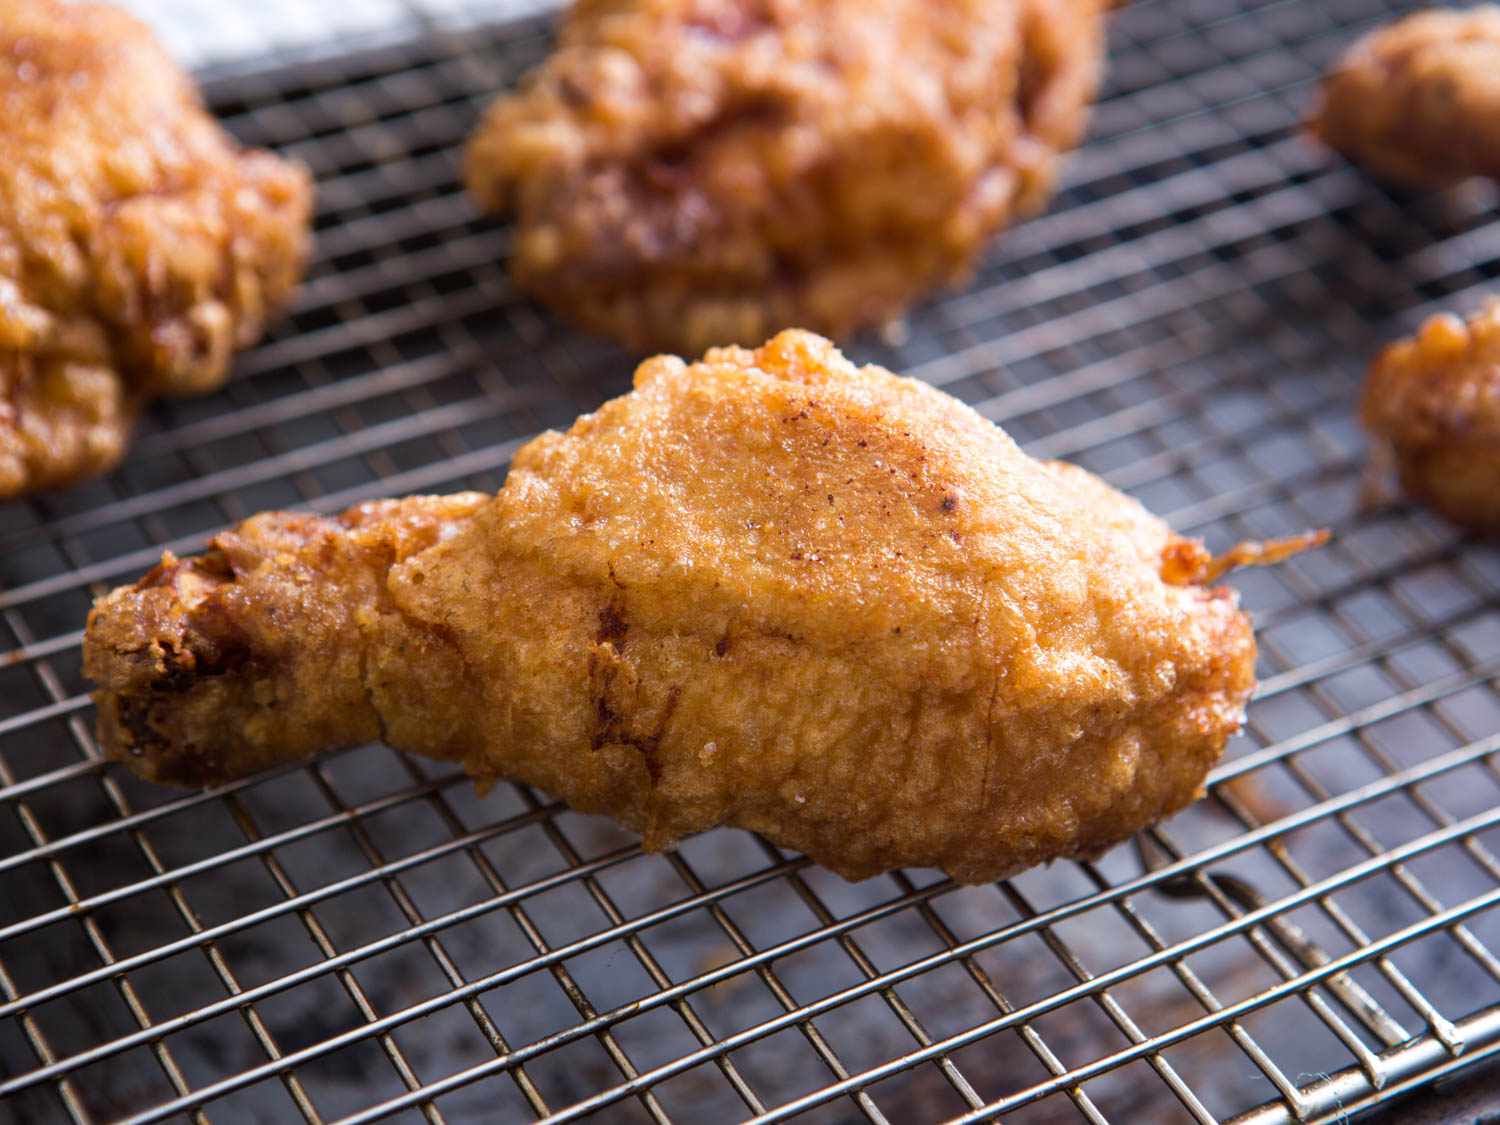 Fried chicken resting on a wire rack set in a baking sheet